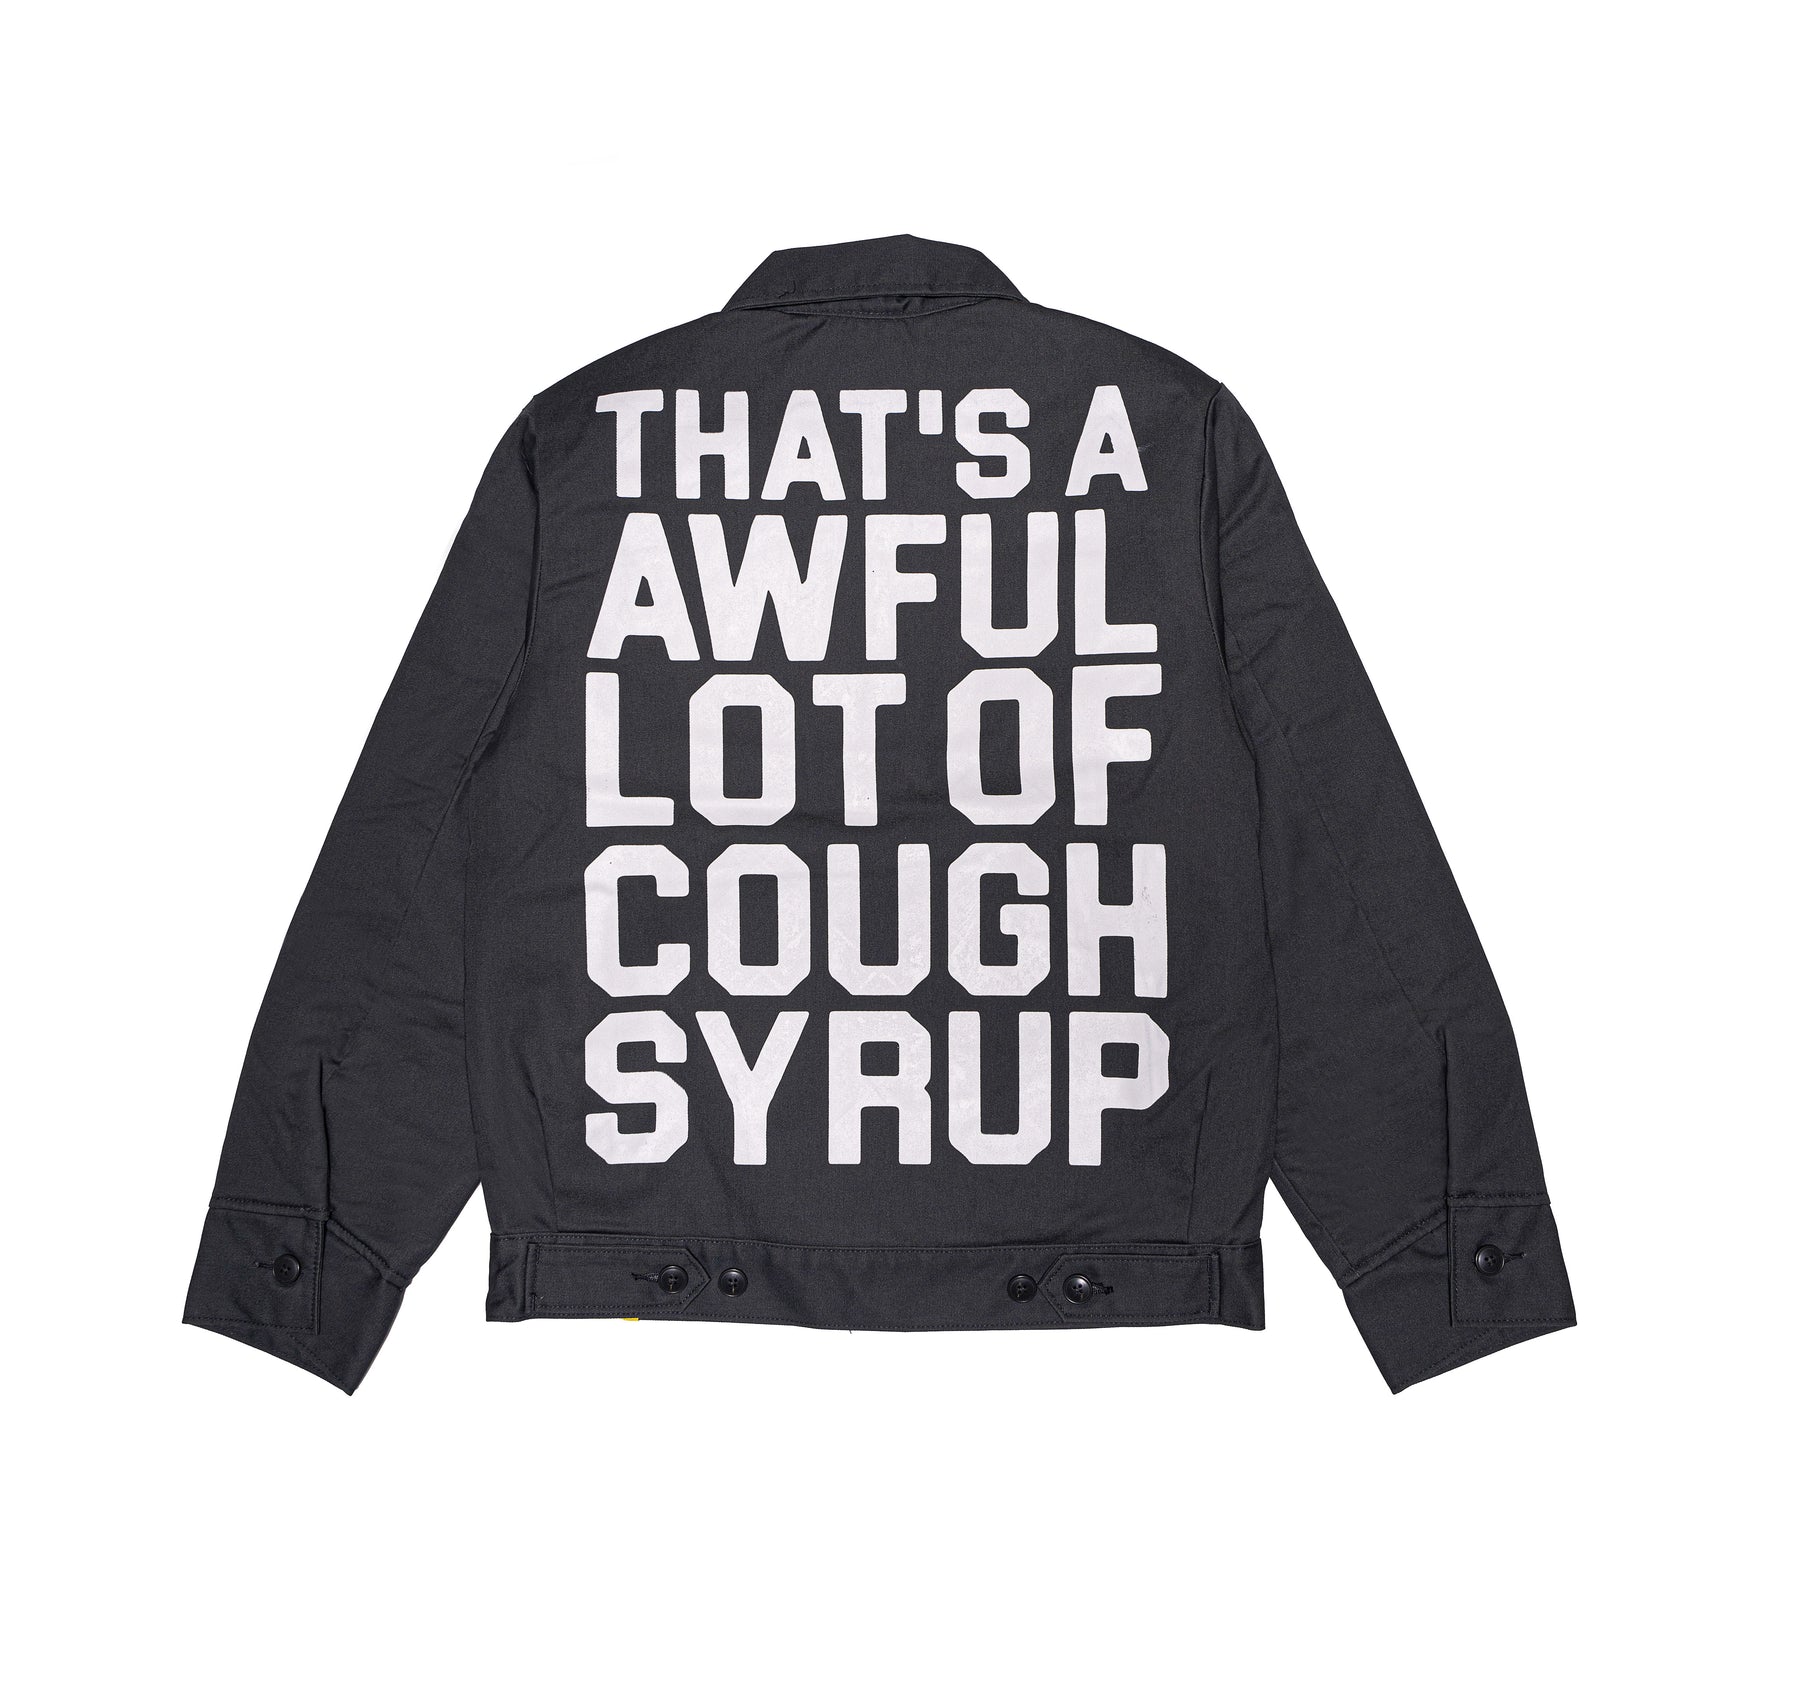 Cough Syrup Dickie's Jacket – THATS A AWFUL LOT OF